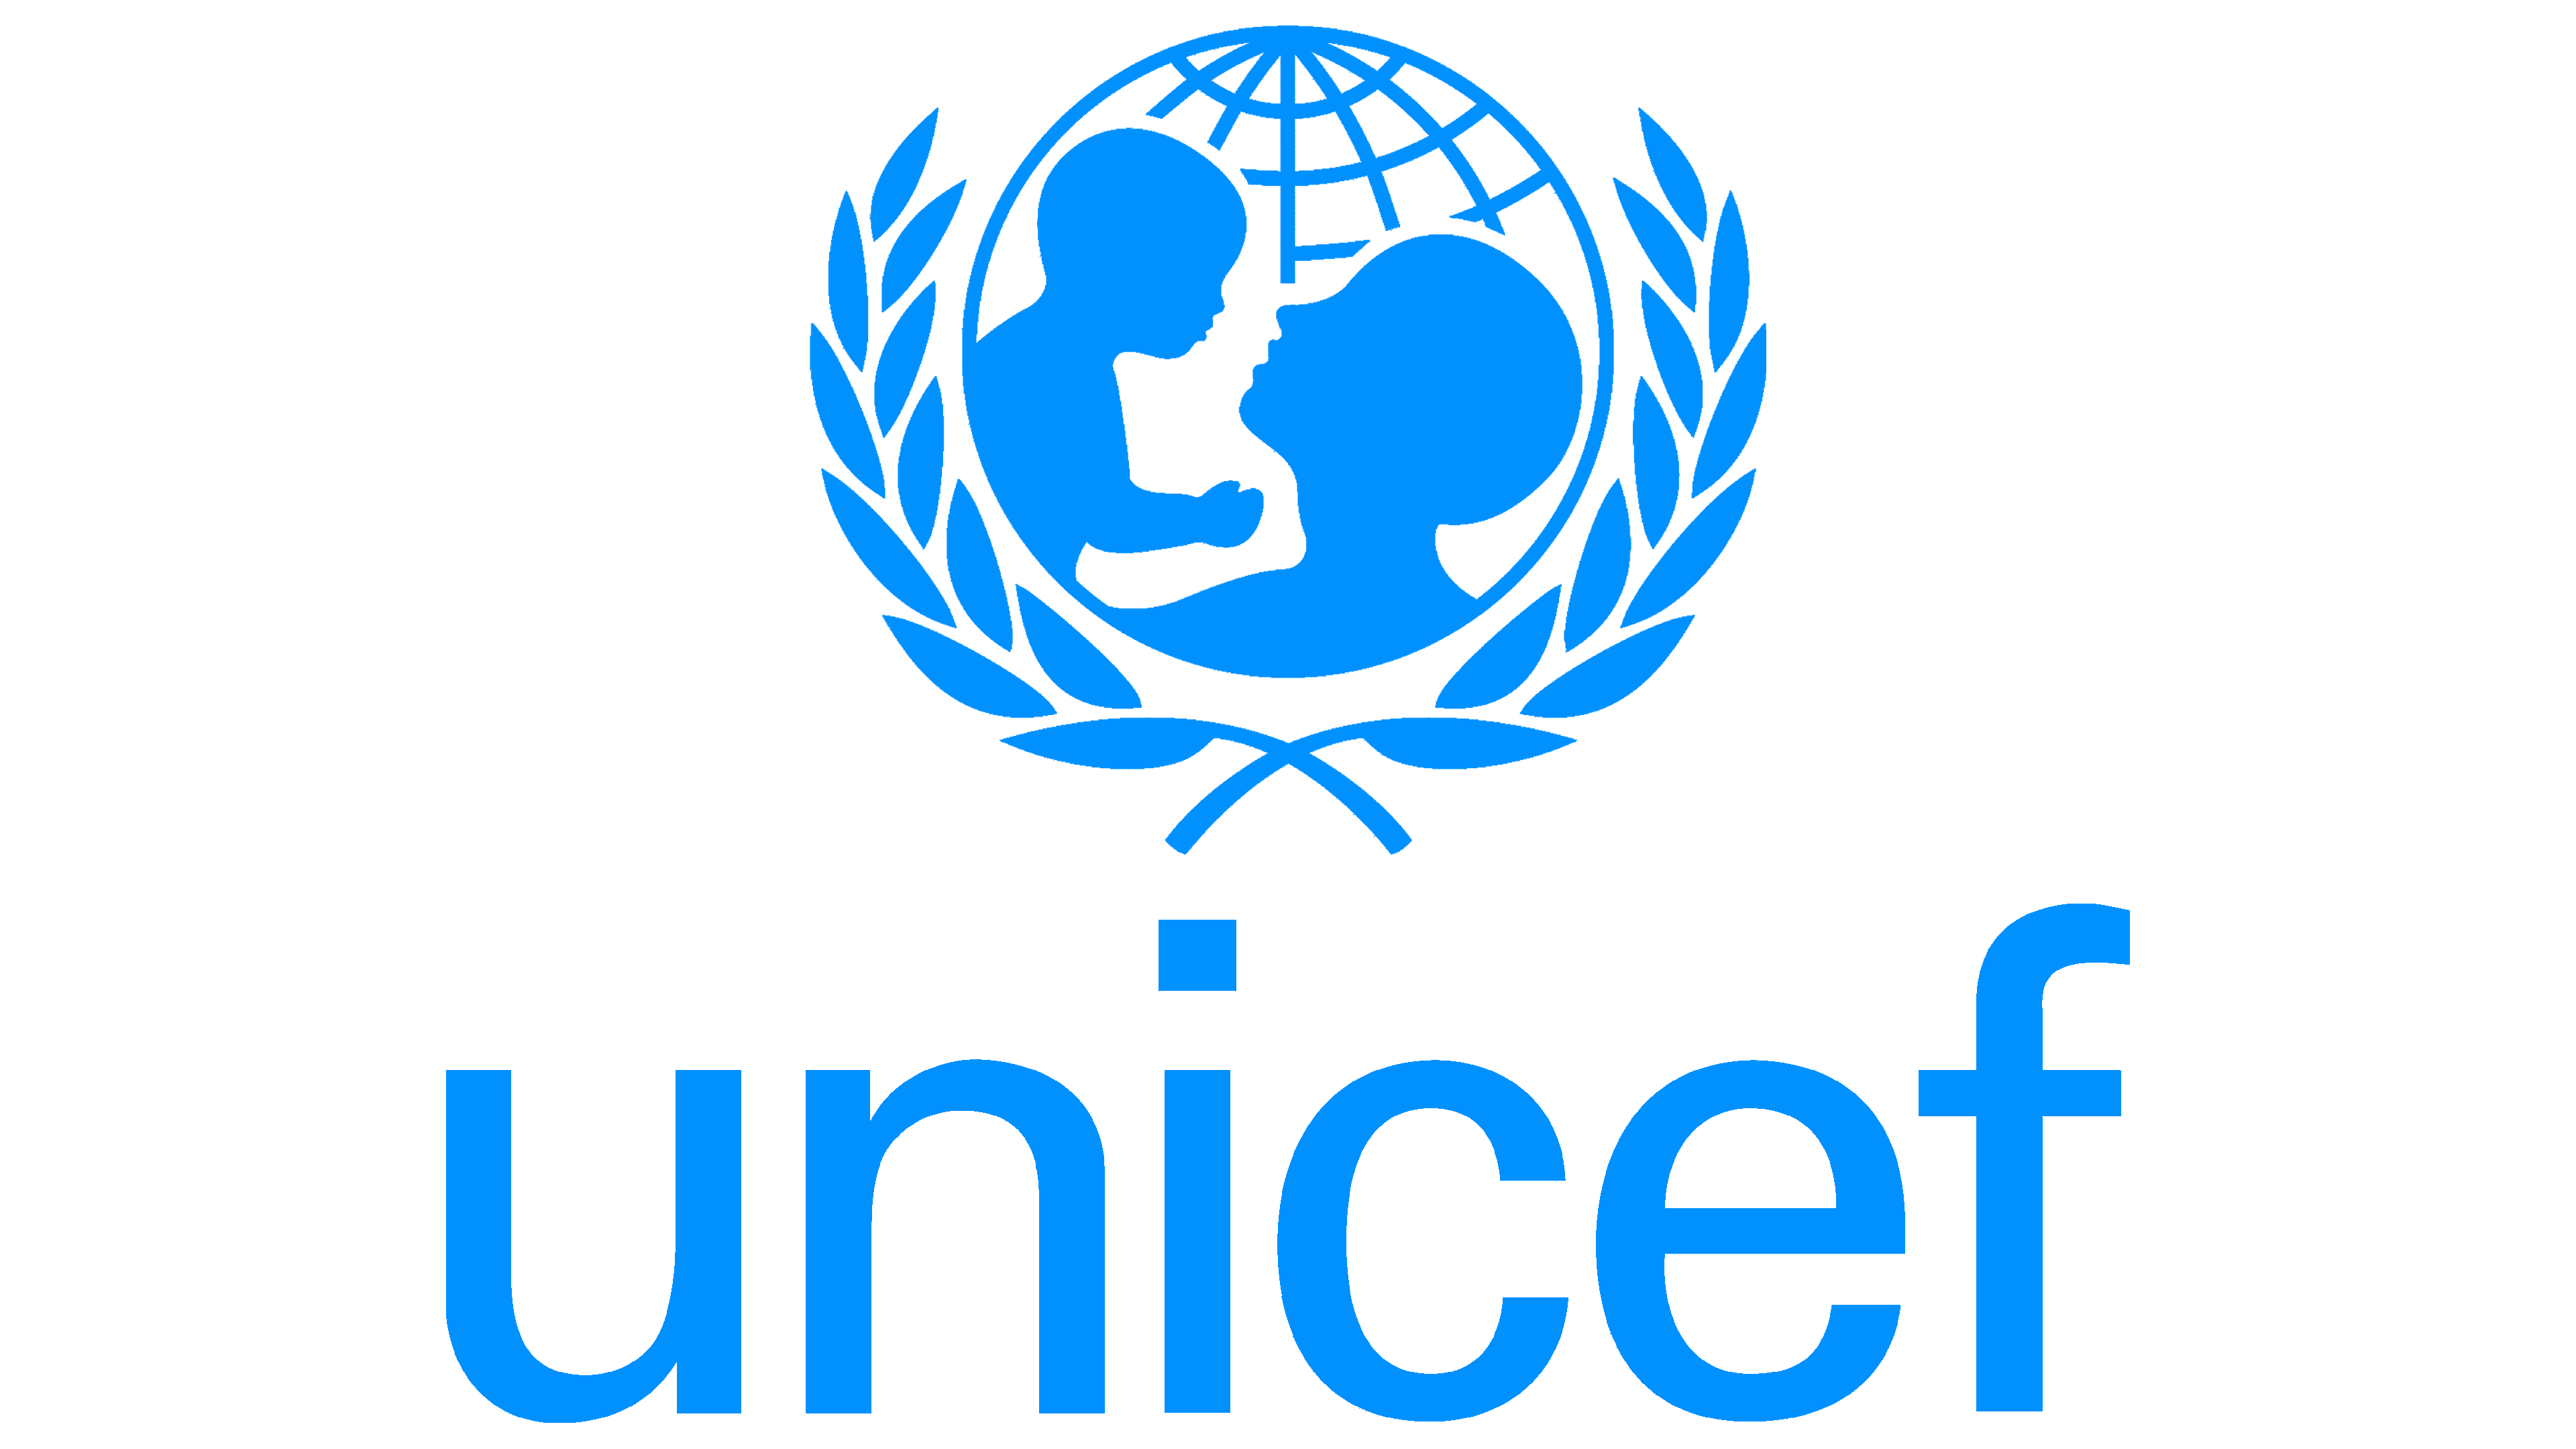 UNICEF Logo, symbol, meaning, history, PNG, brand